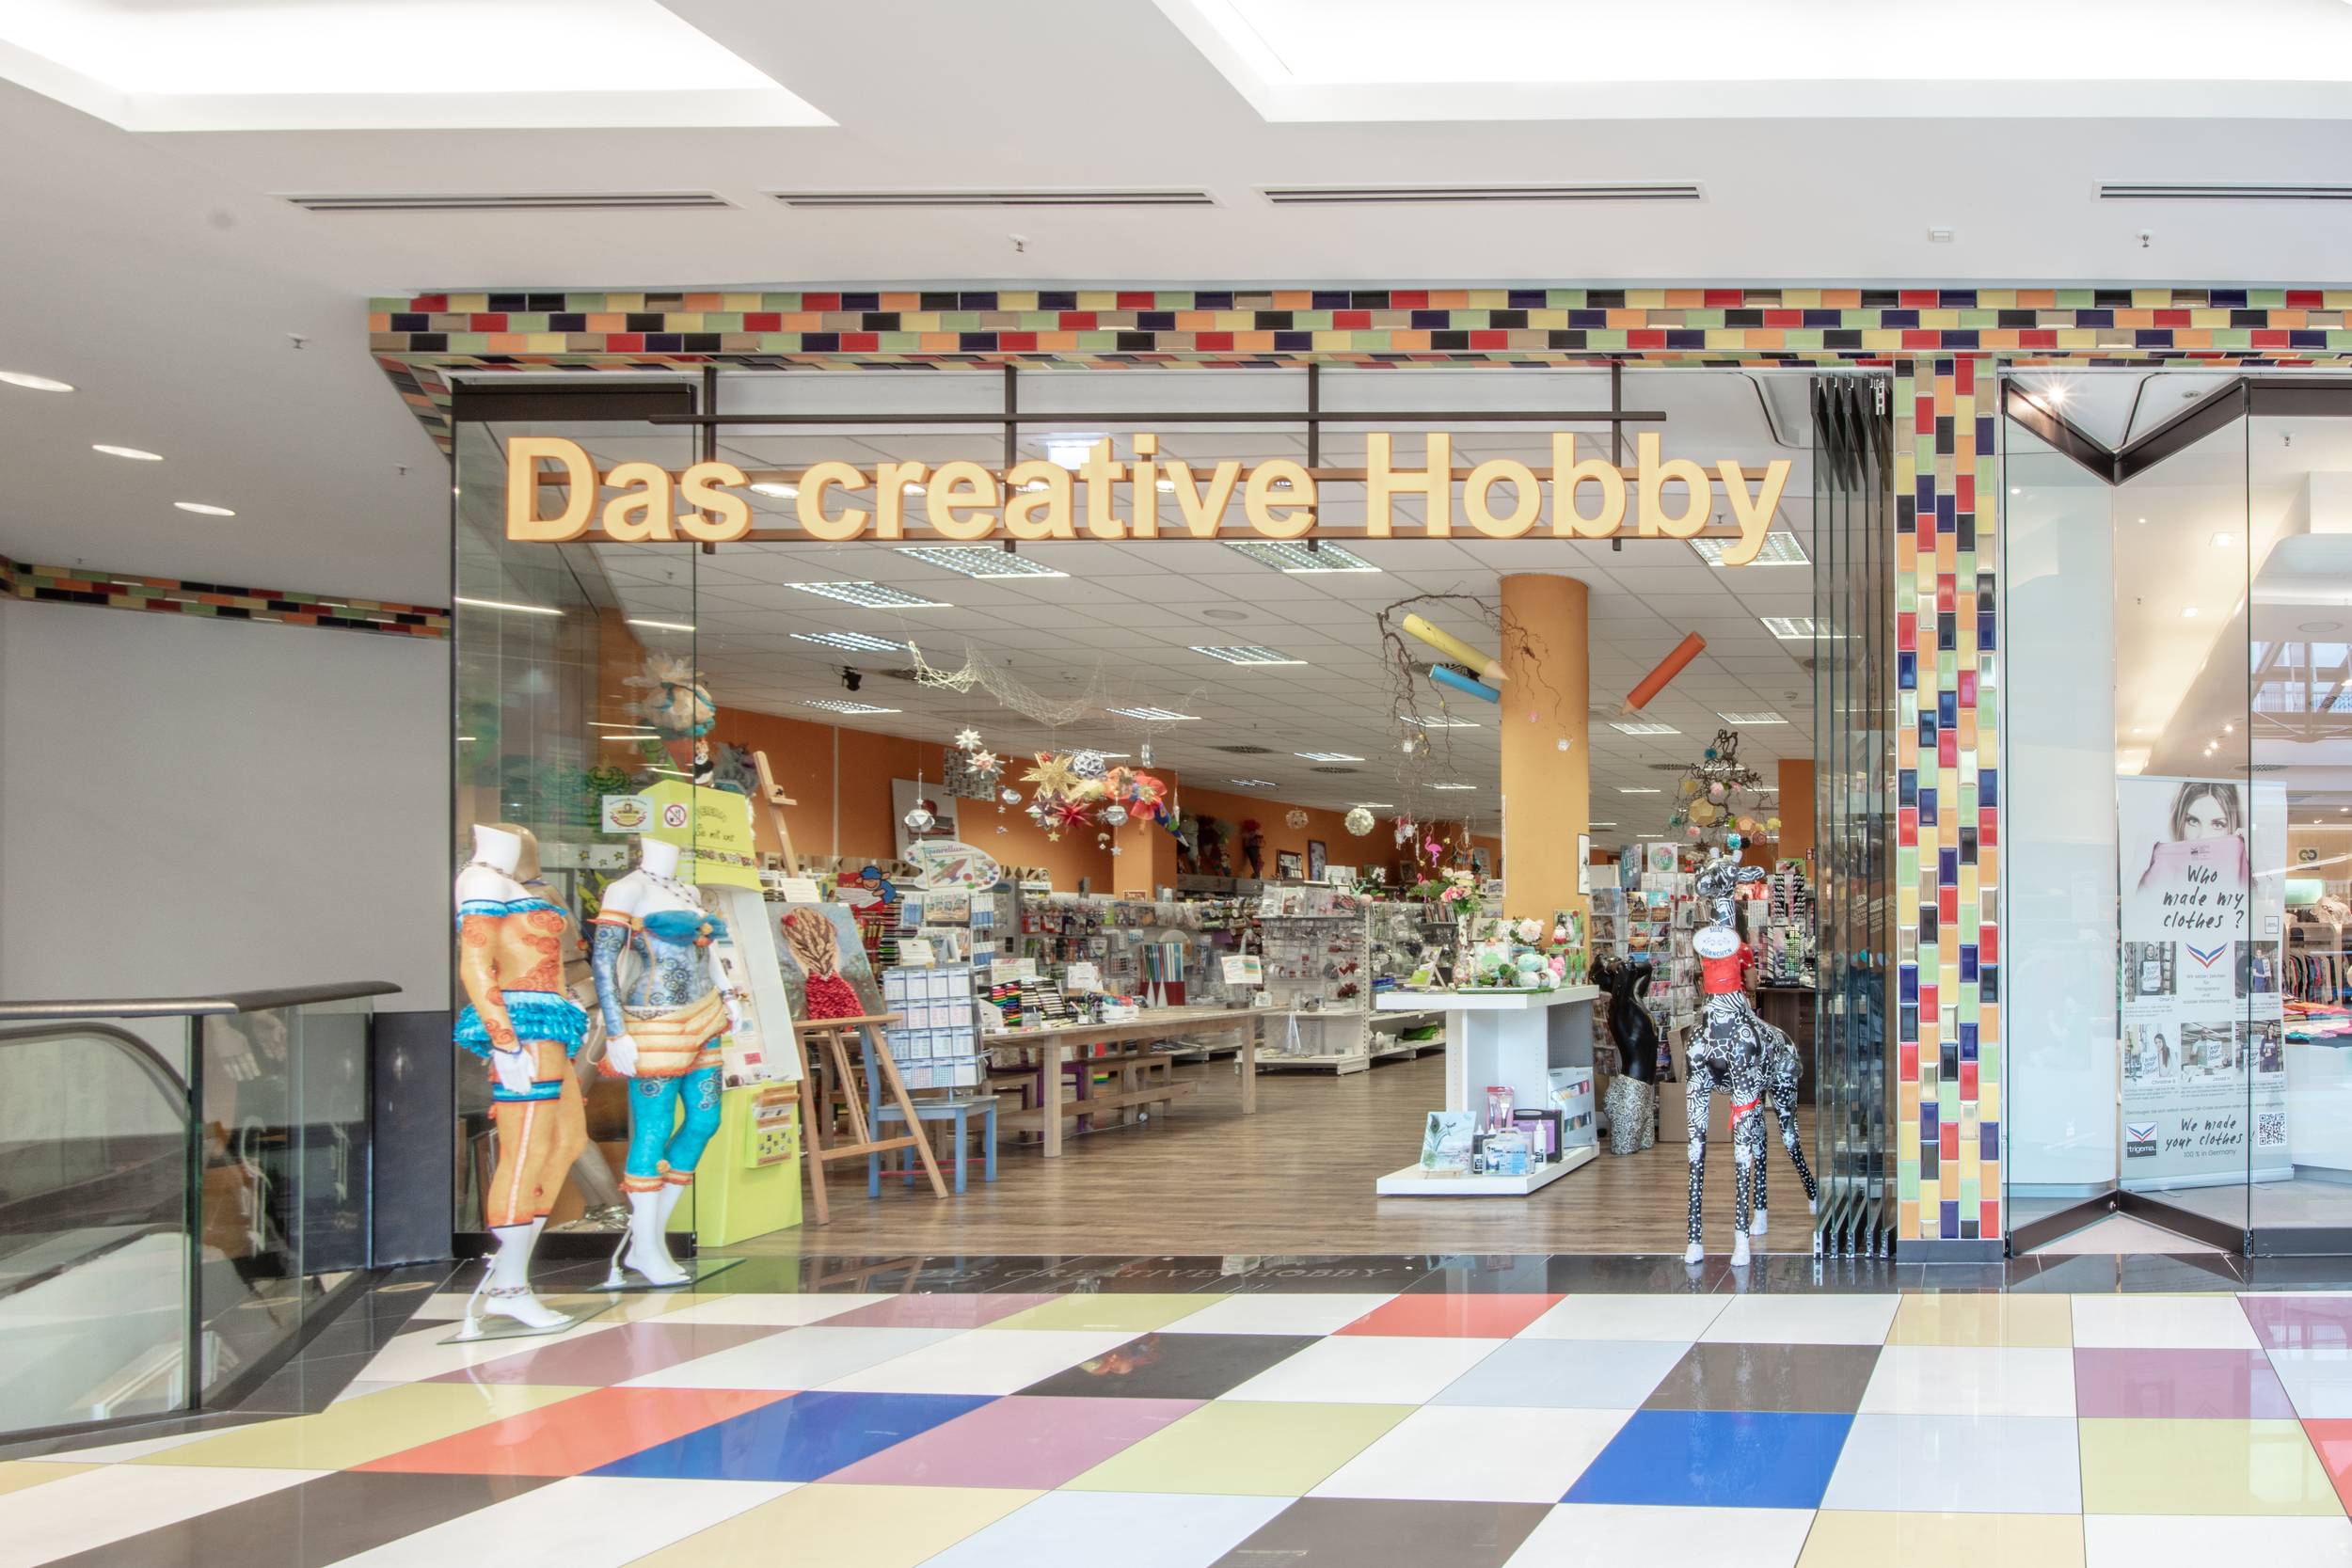 [Translate to English:] Das creative Hobby in der Mall of Berlin